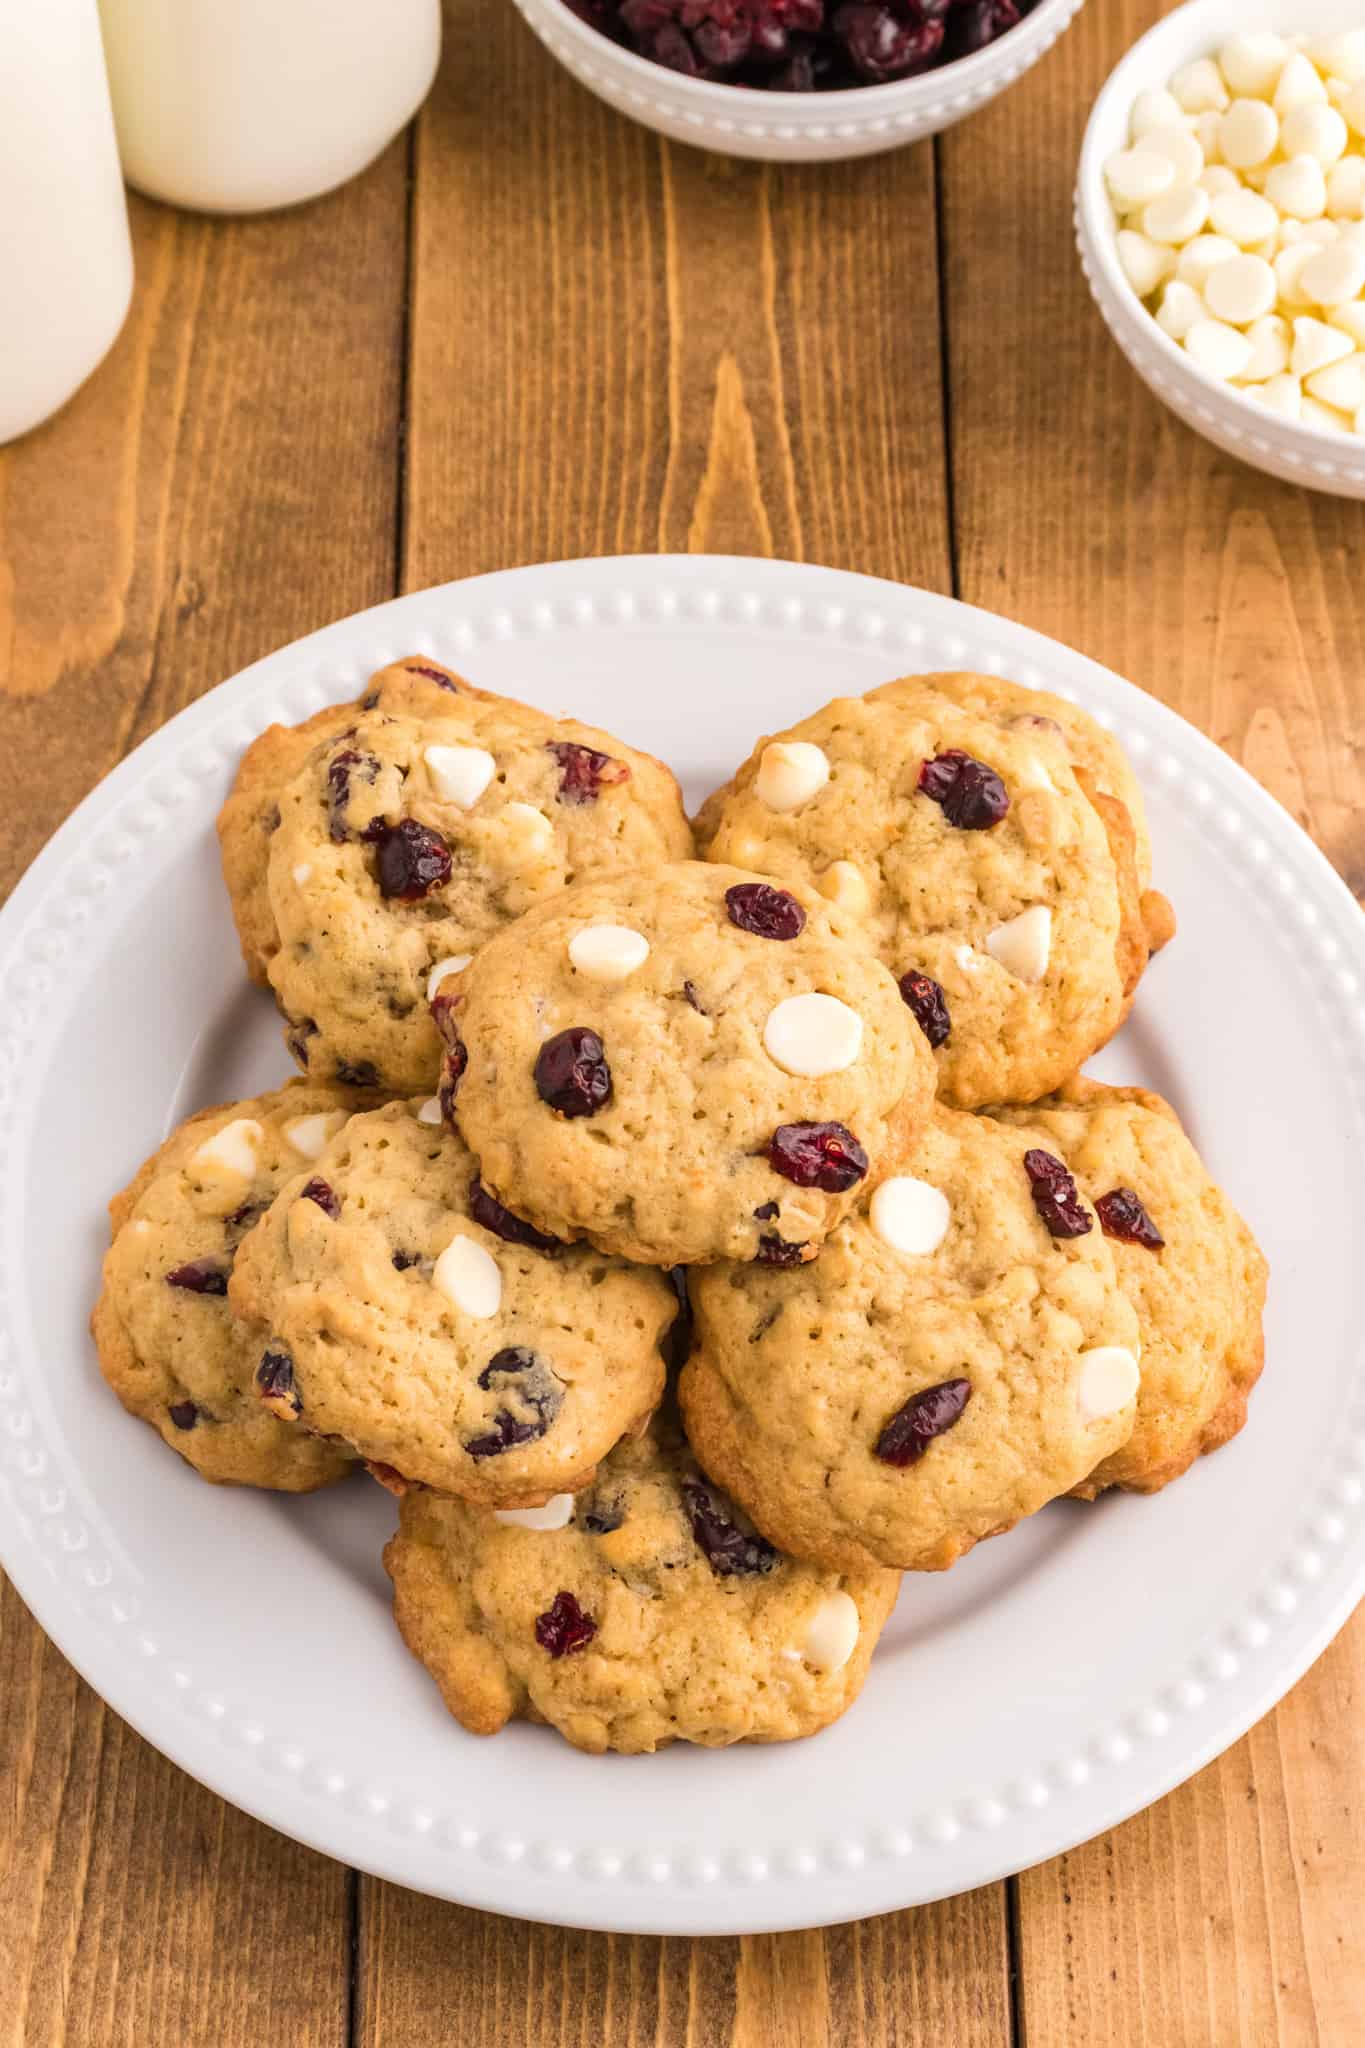 White Chocolate Cranberry Oatmeal Cookies are delicious chewy oatmeal cookies loaded with white chocolate chips and dried cranberries.